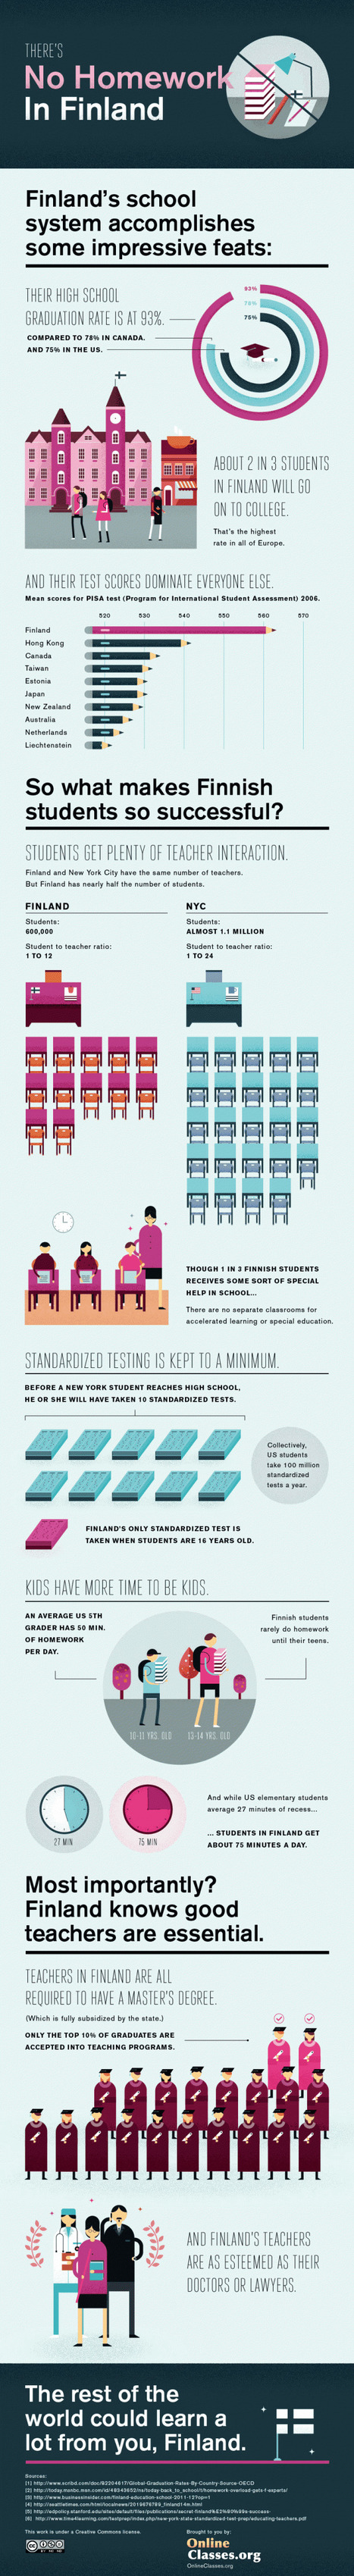 What You Should Know About Education In Finland - Infographic | E-Learning-Inclusivo (Mashup) | Scoop.it